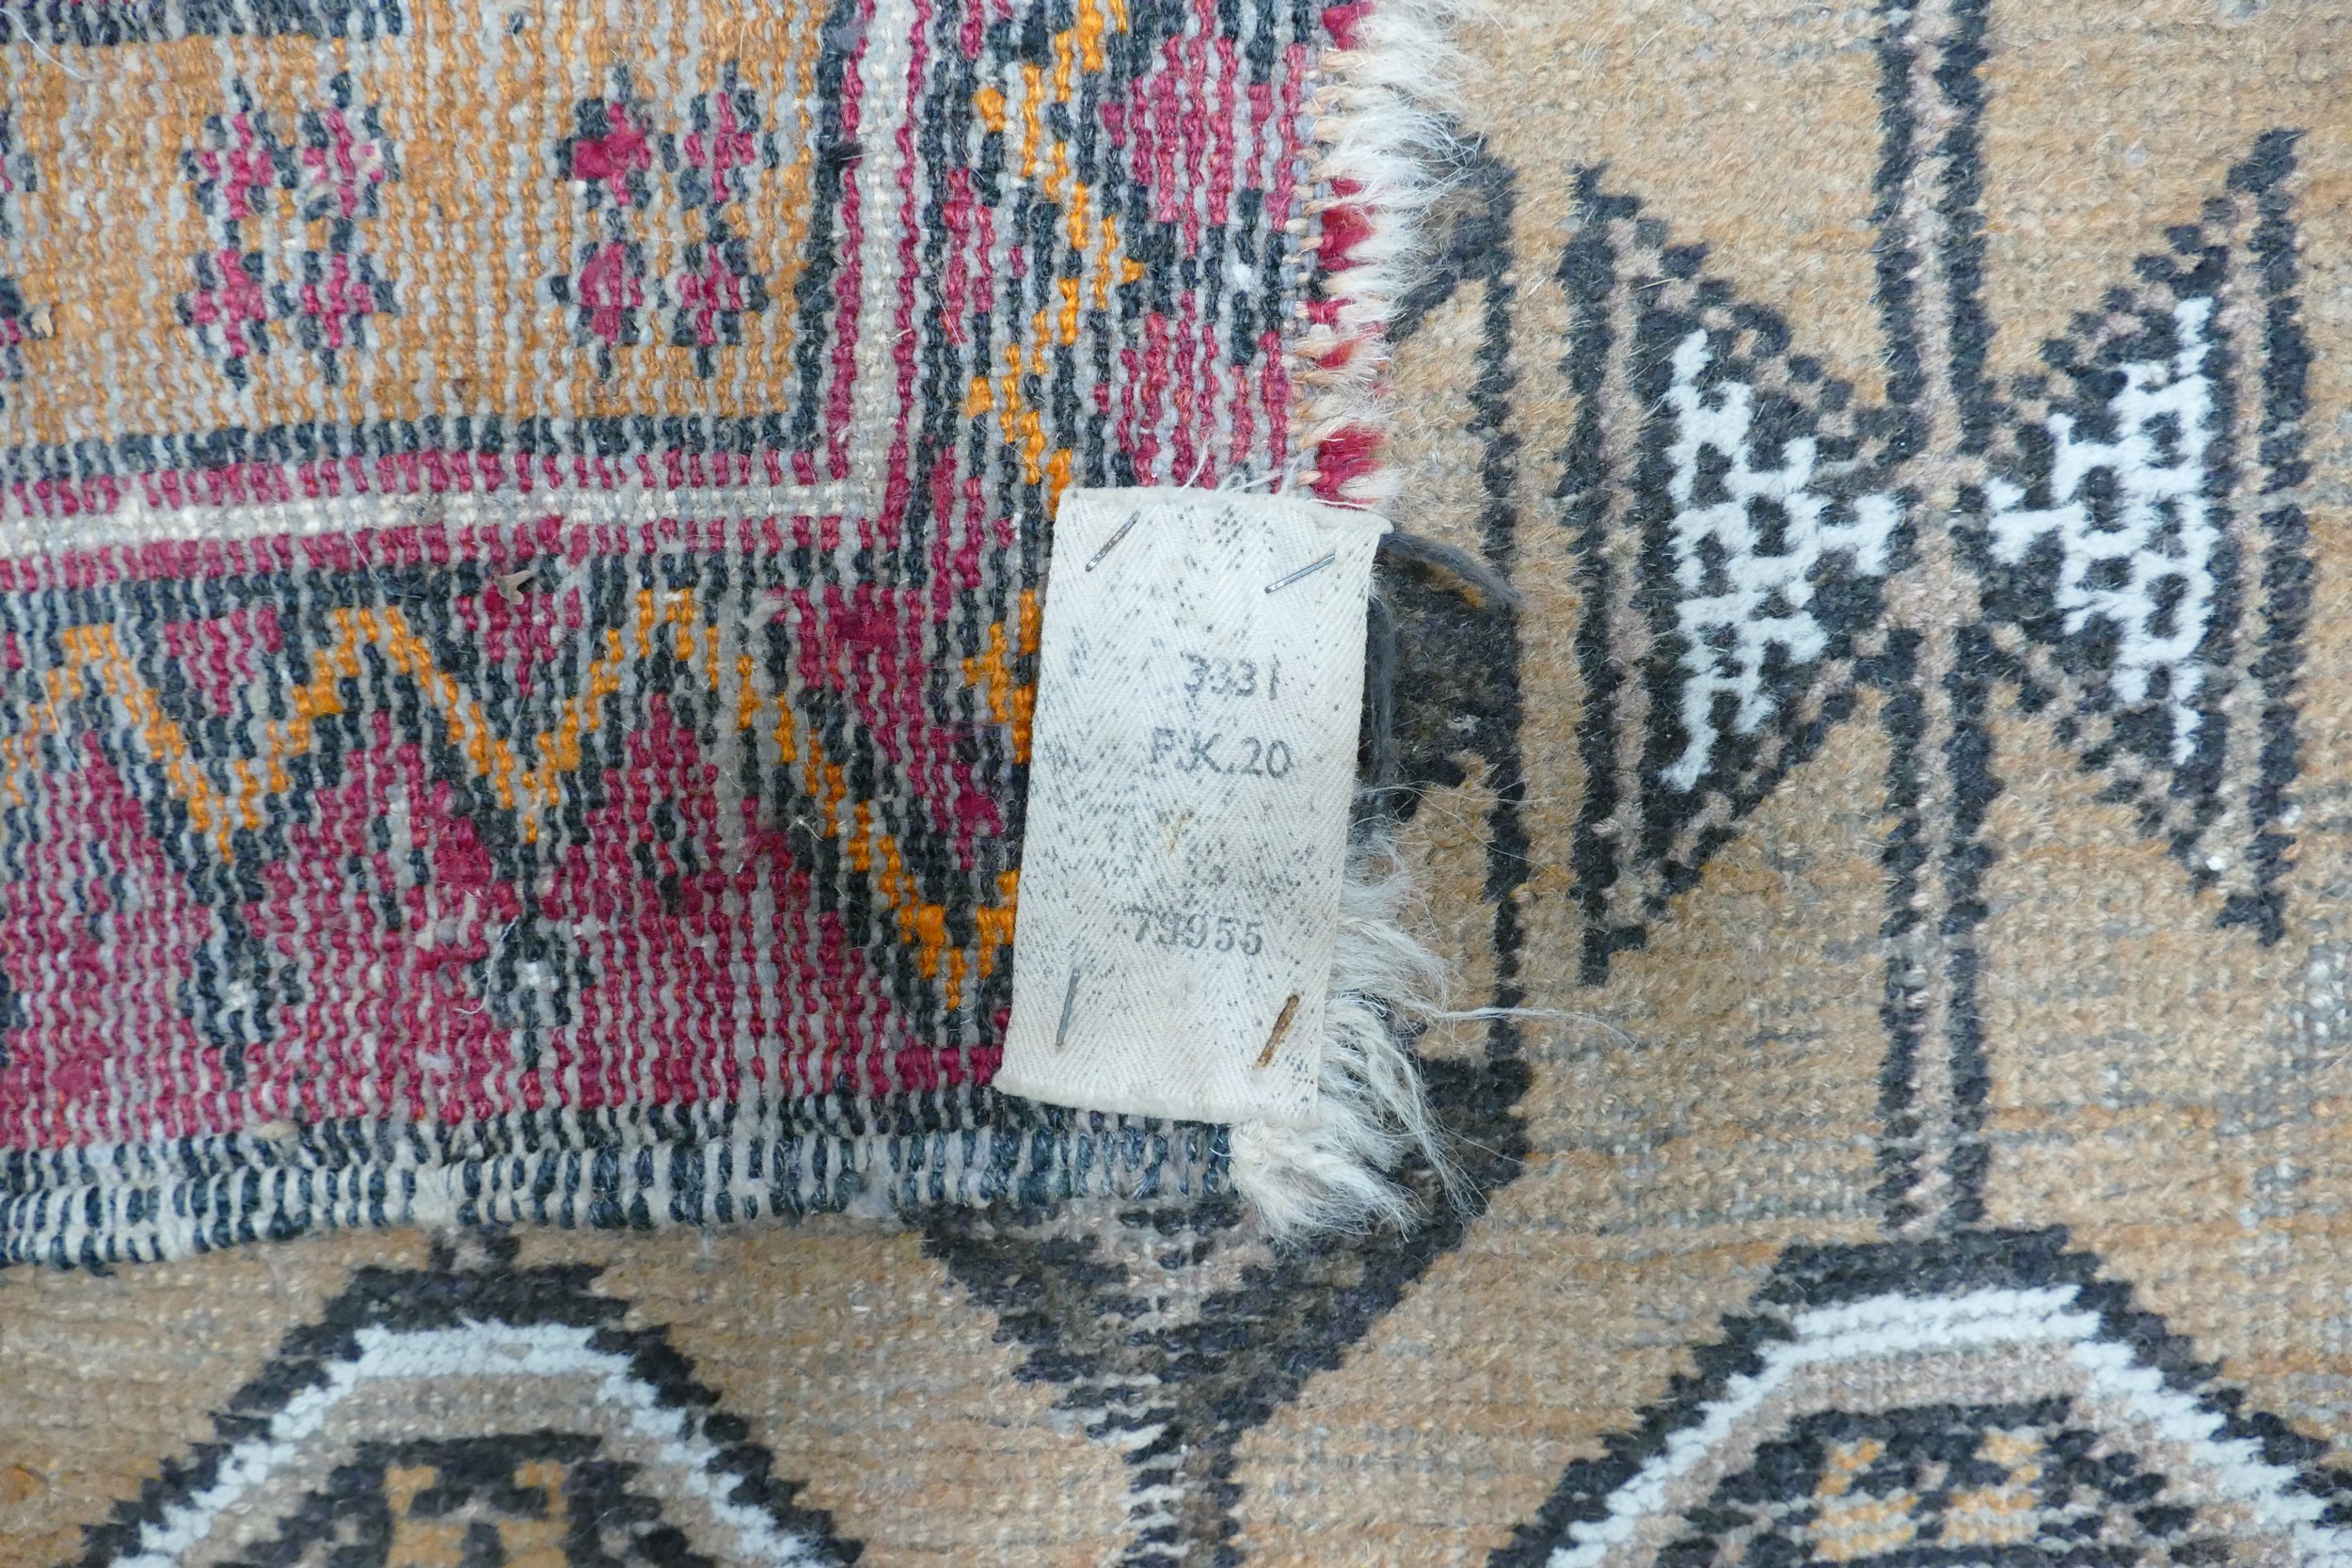 A Distressed Afghan Style Prayer Rug. Wear and fraying noted. Length: 138cm Width: 90cm - Image 2 of 2